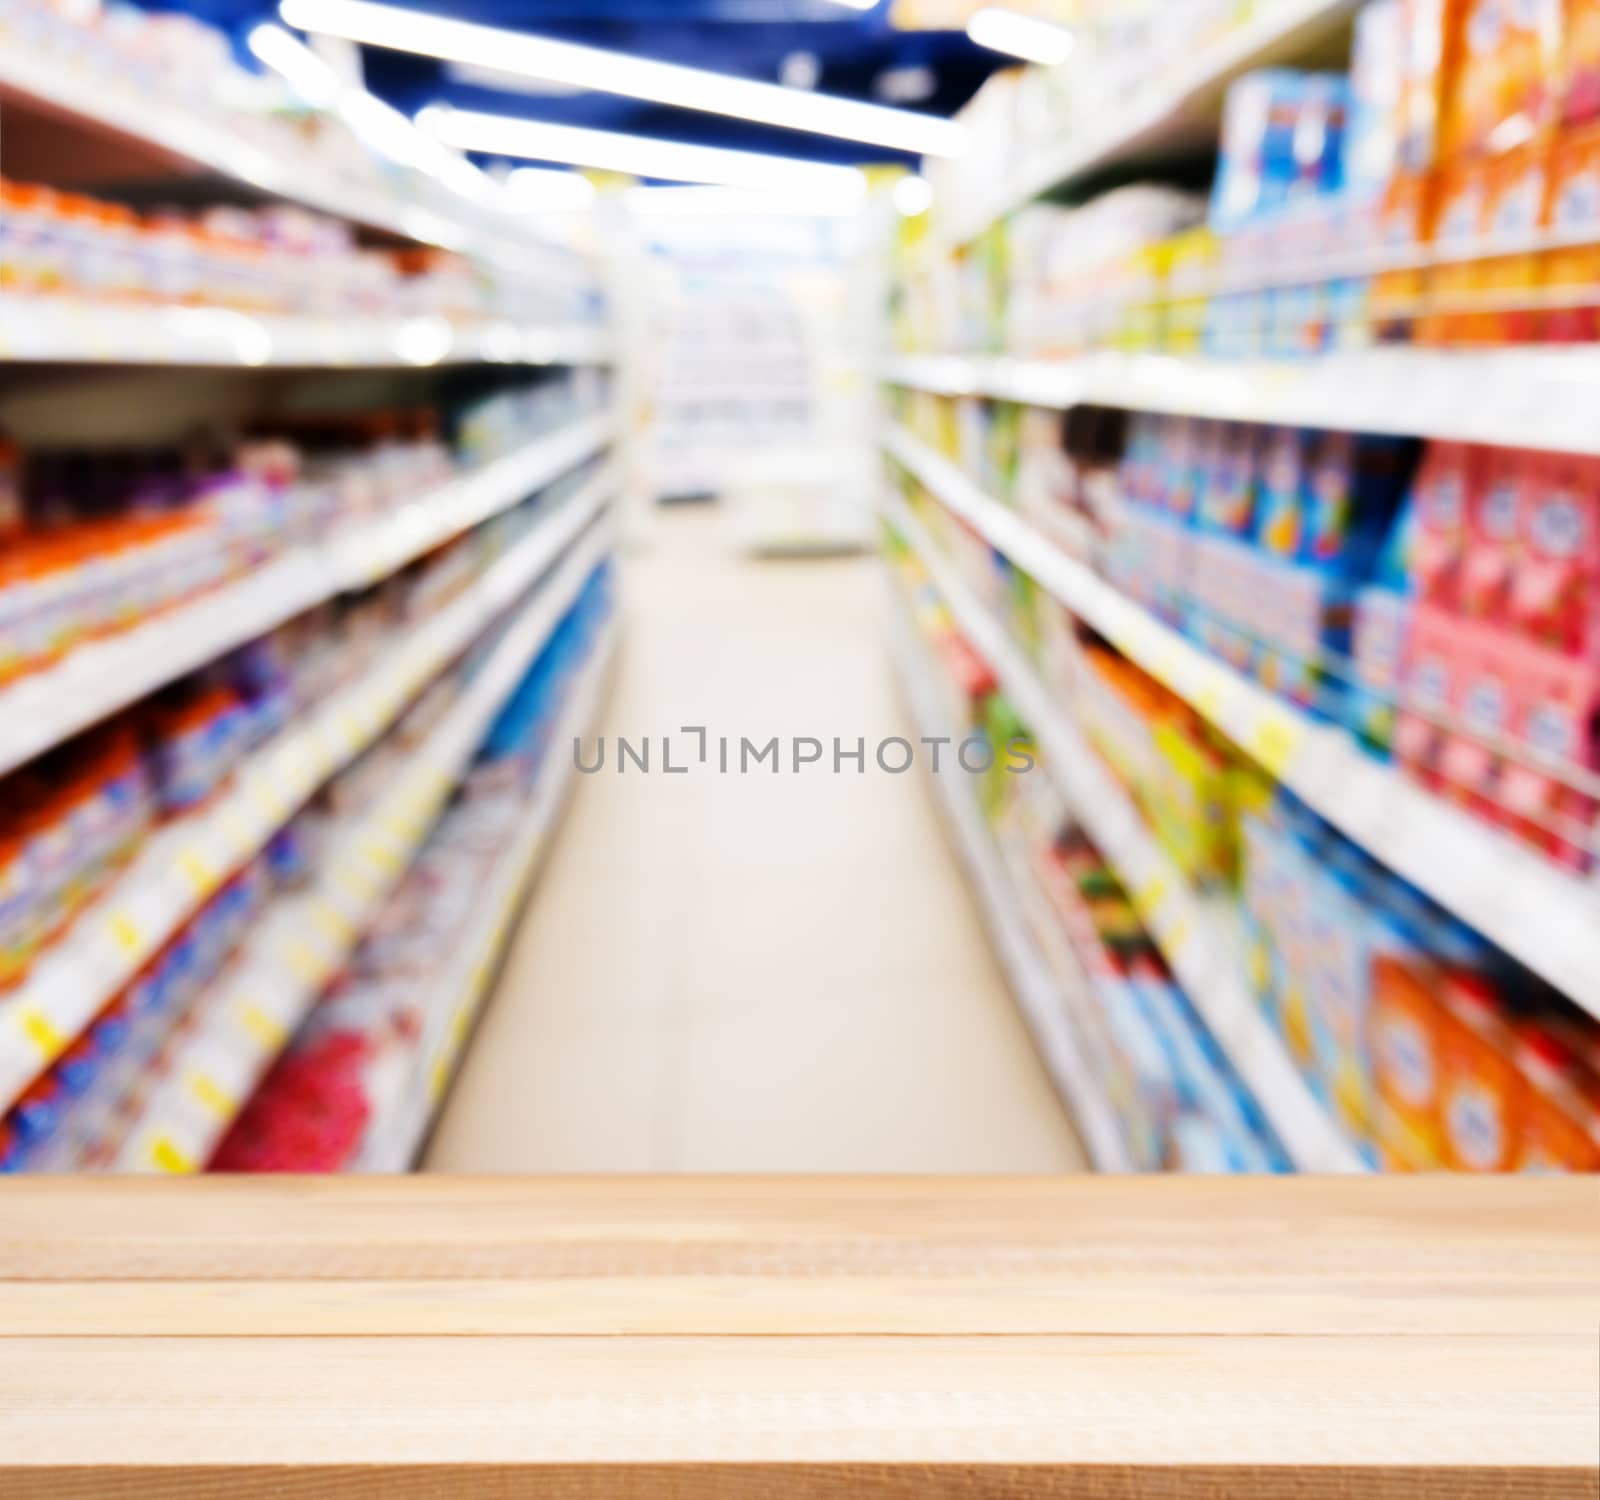 Wooden board in front of baby foods jars in store by fascinadora